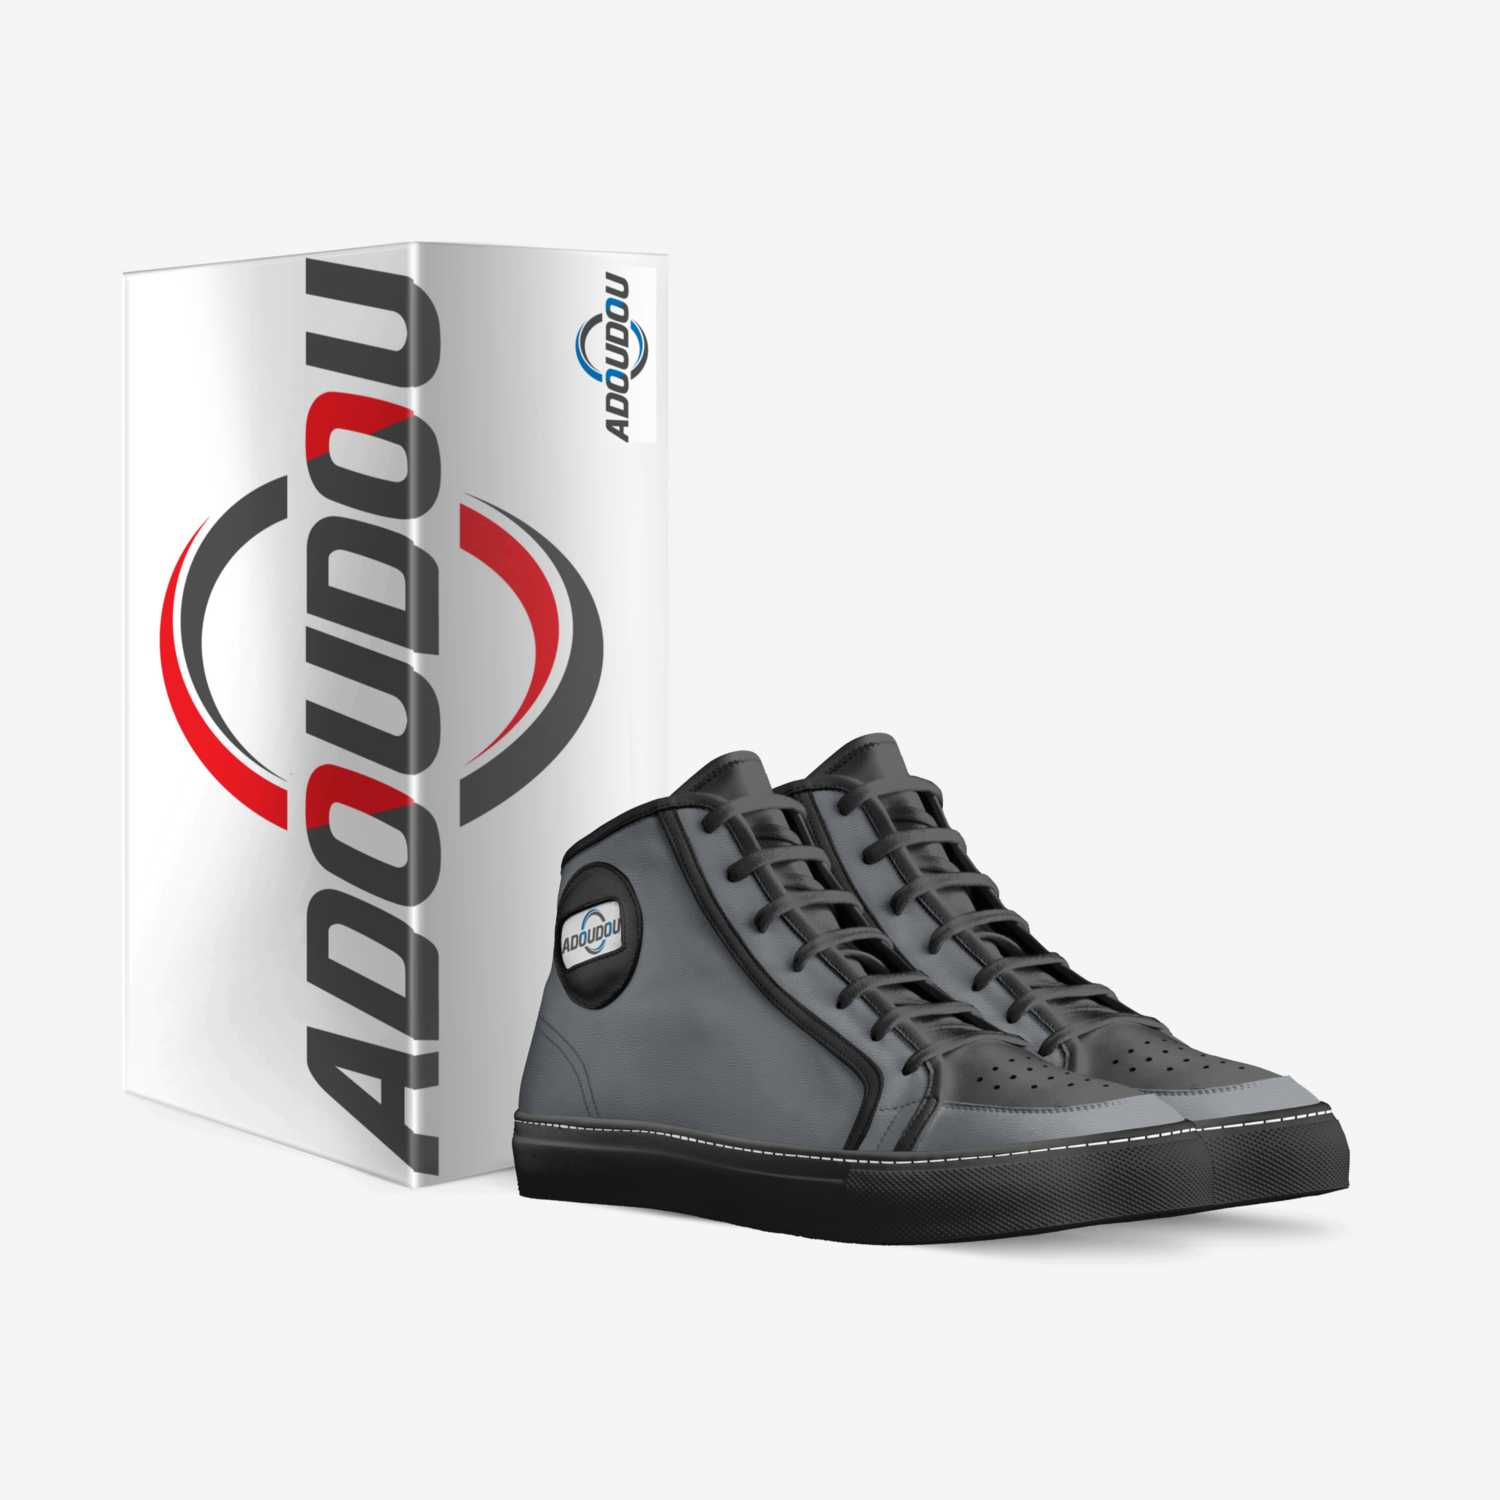 ADOUDOU custom made in Italy shoes by Marc A Brianvil | Box view